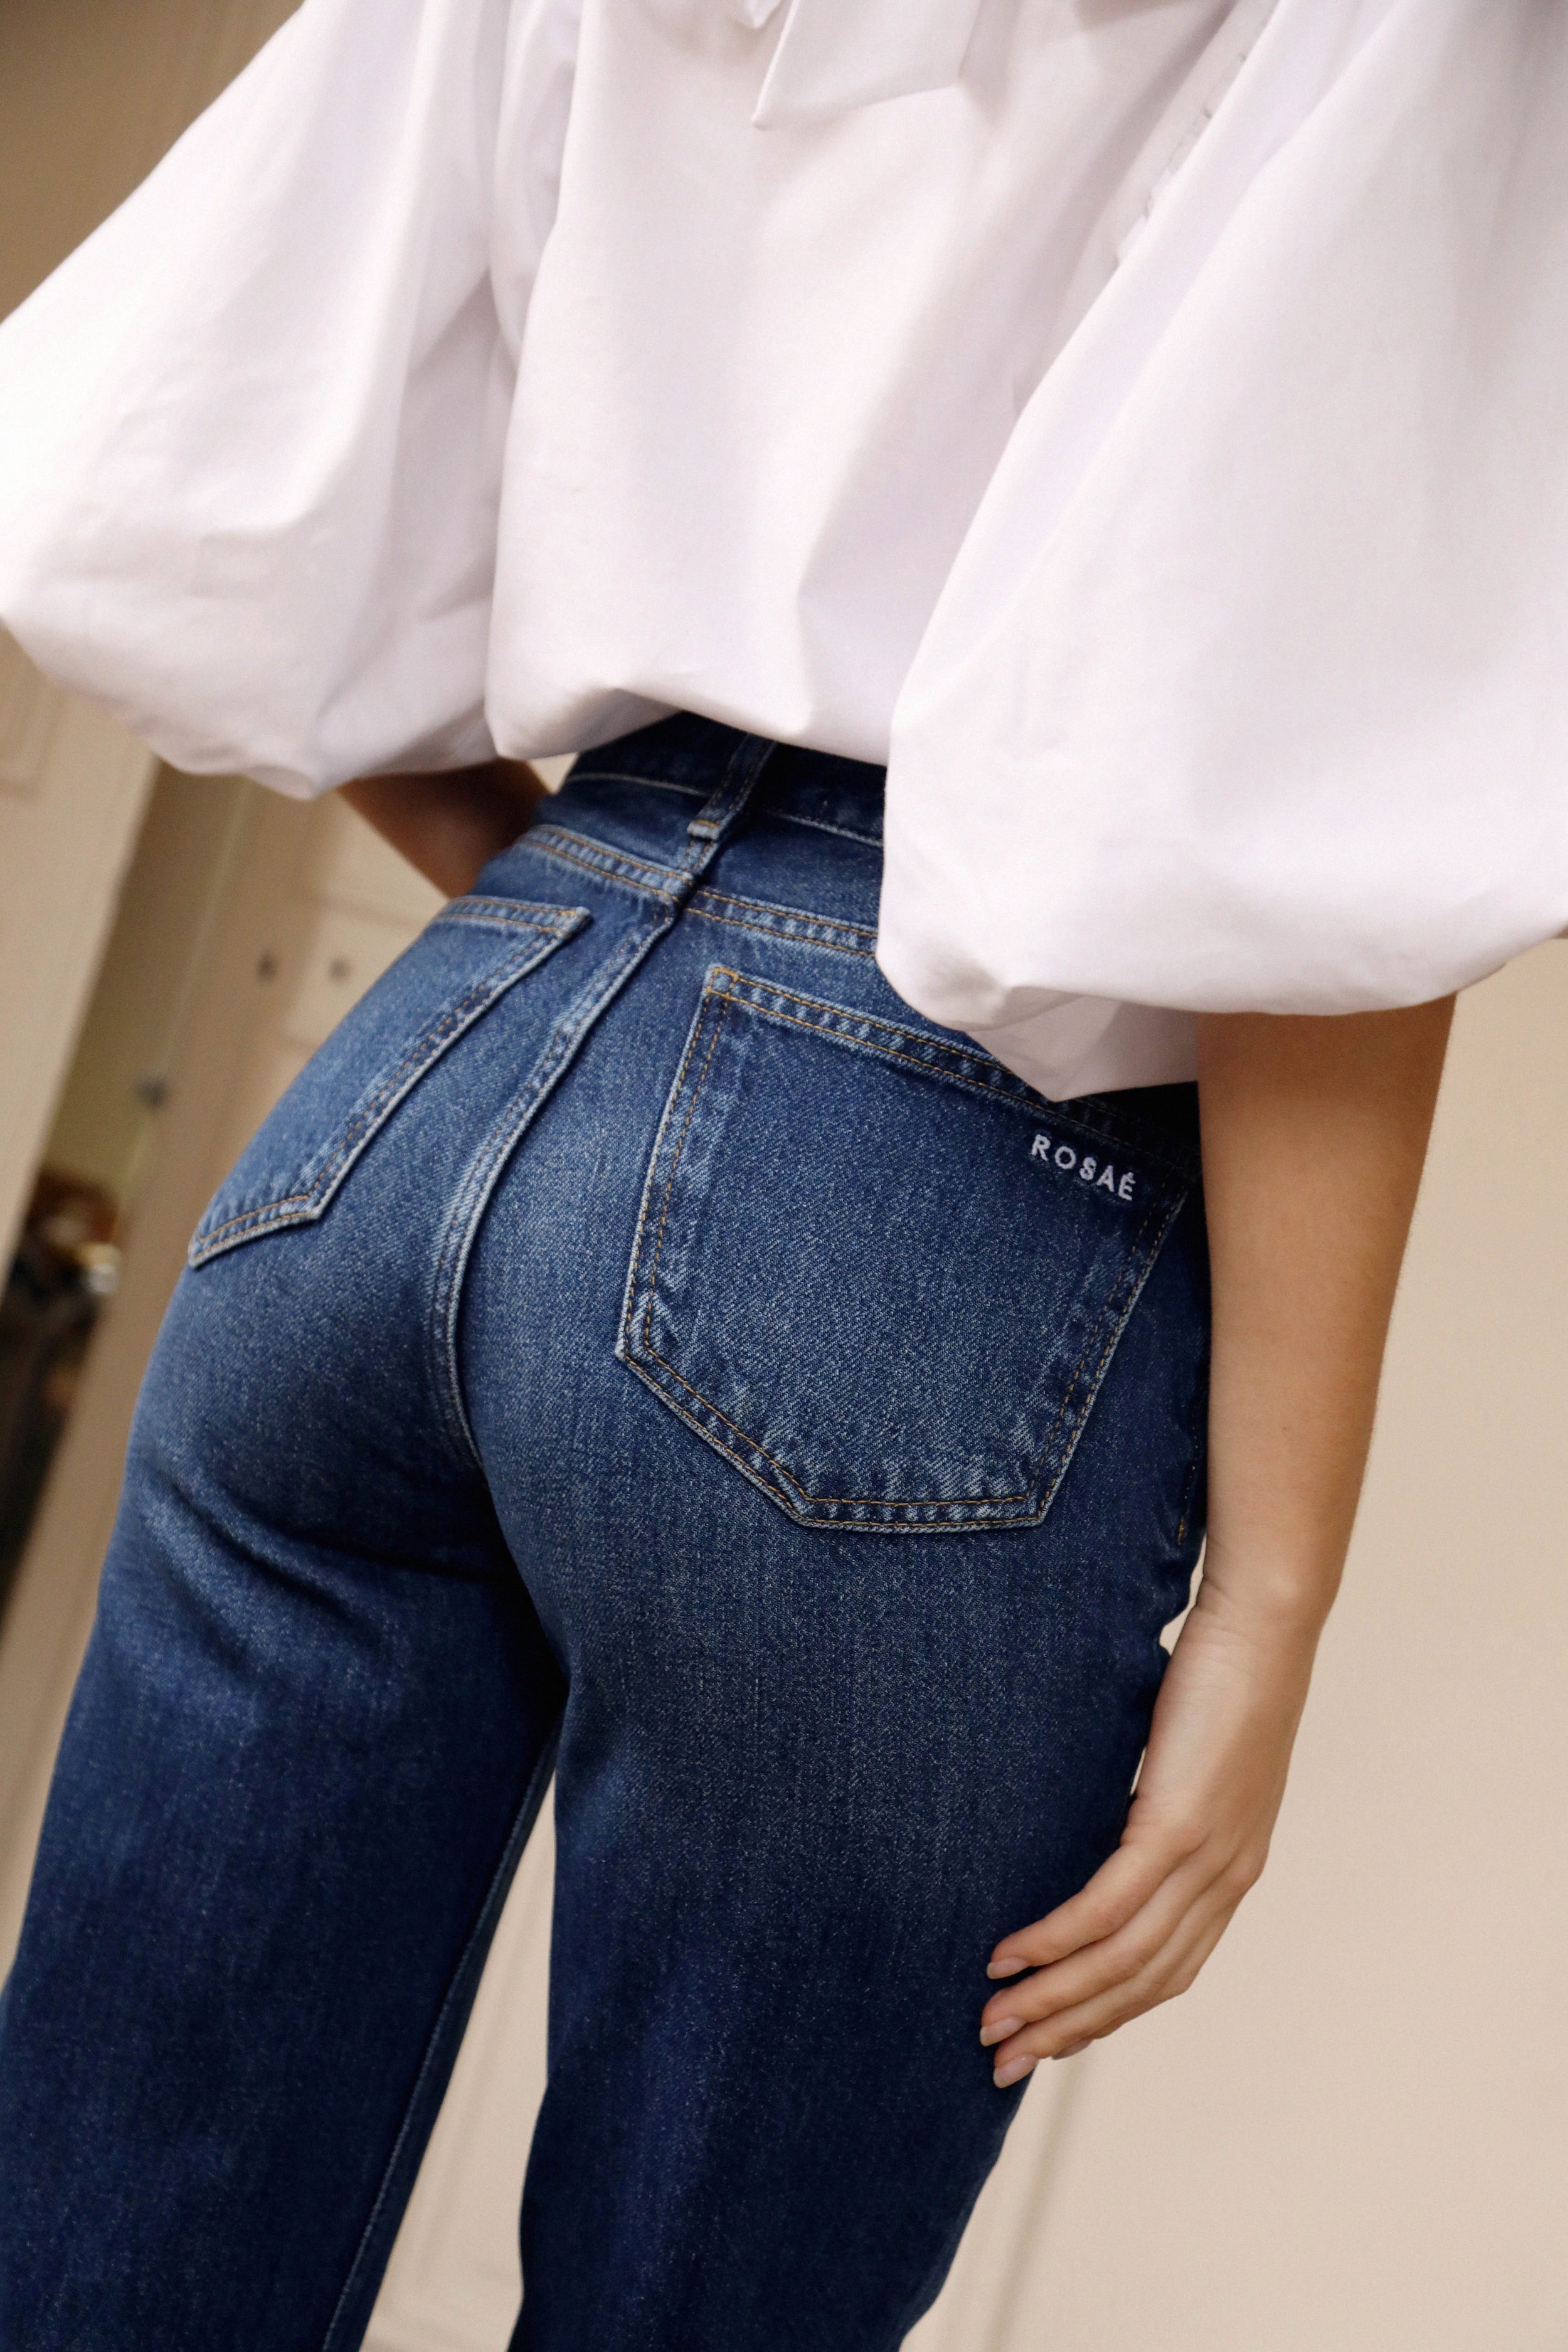 Le Dan - The Essential and Timeless Stove Pipe Jeans — Rosae Paris